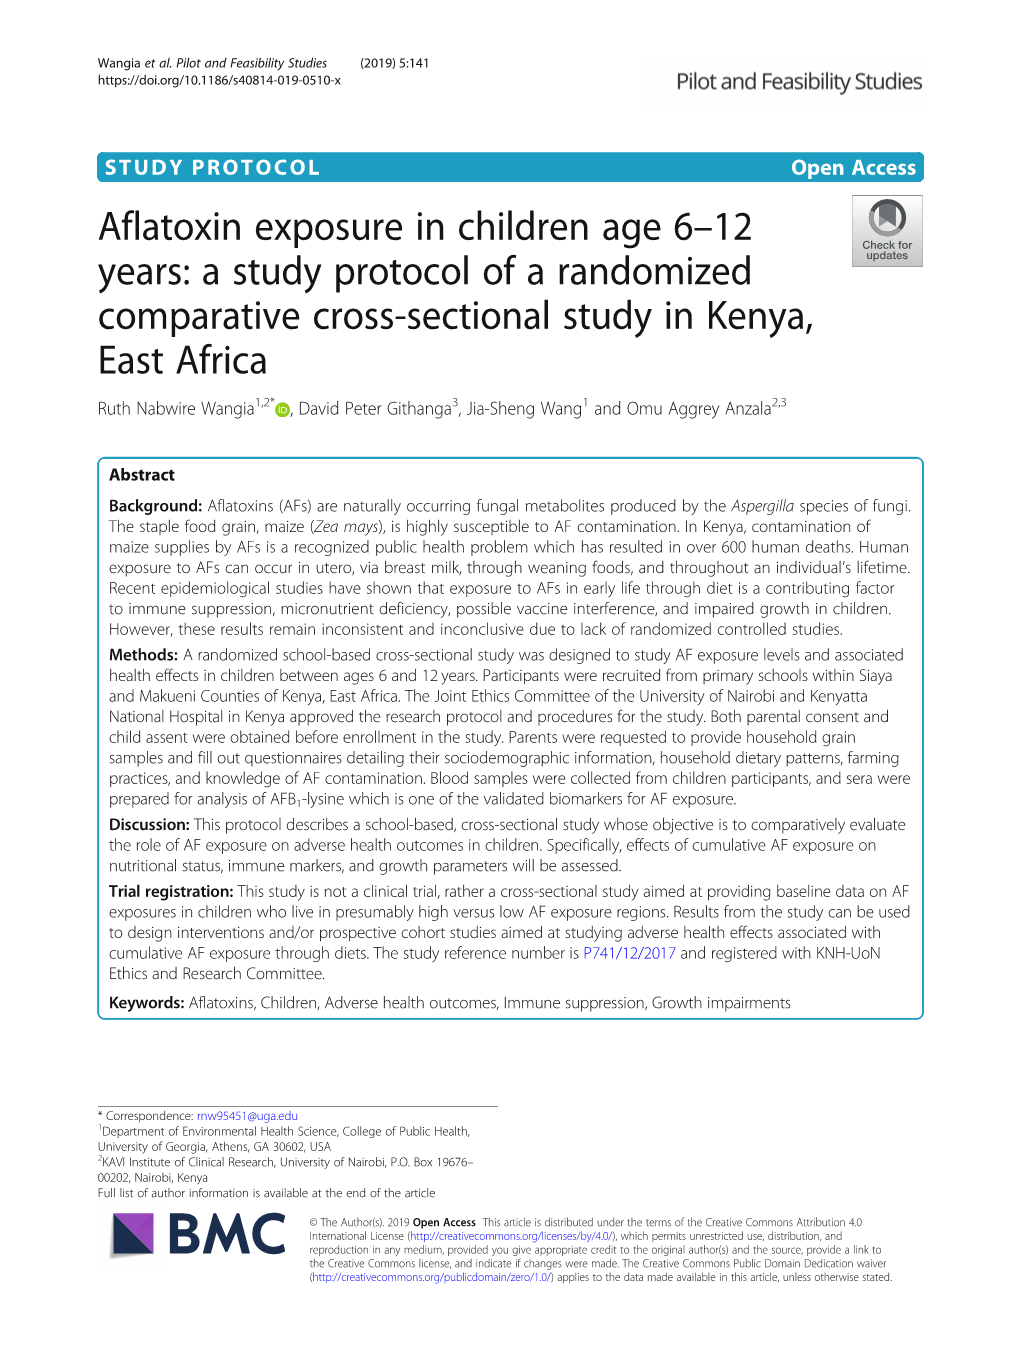 Aflatoxin Exposure in Children Age 6–12 Years: a Study Protocol of a Randomized Comparative Cross-Sectional Study in Kenya